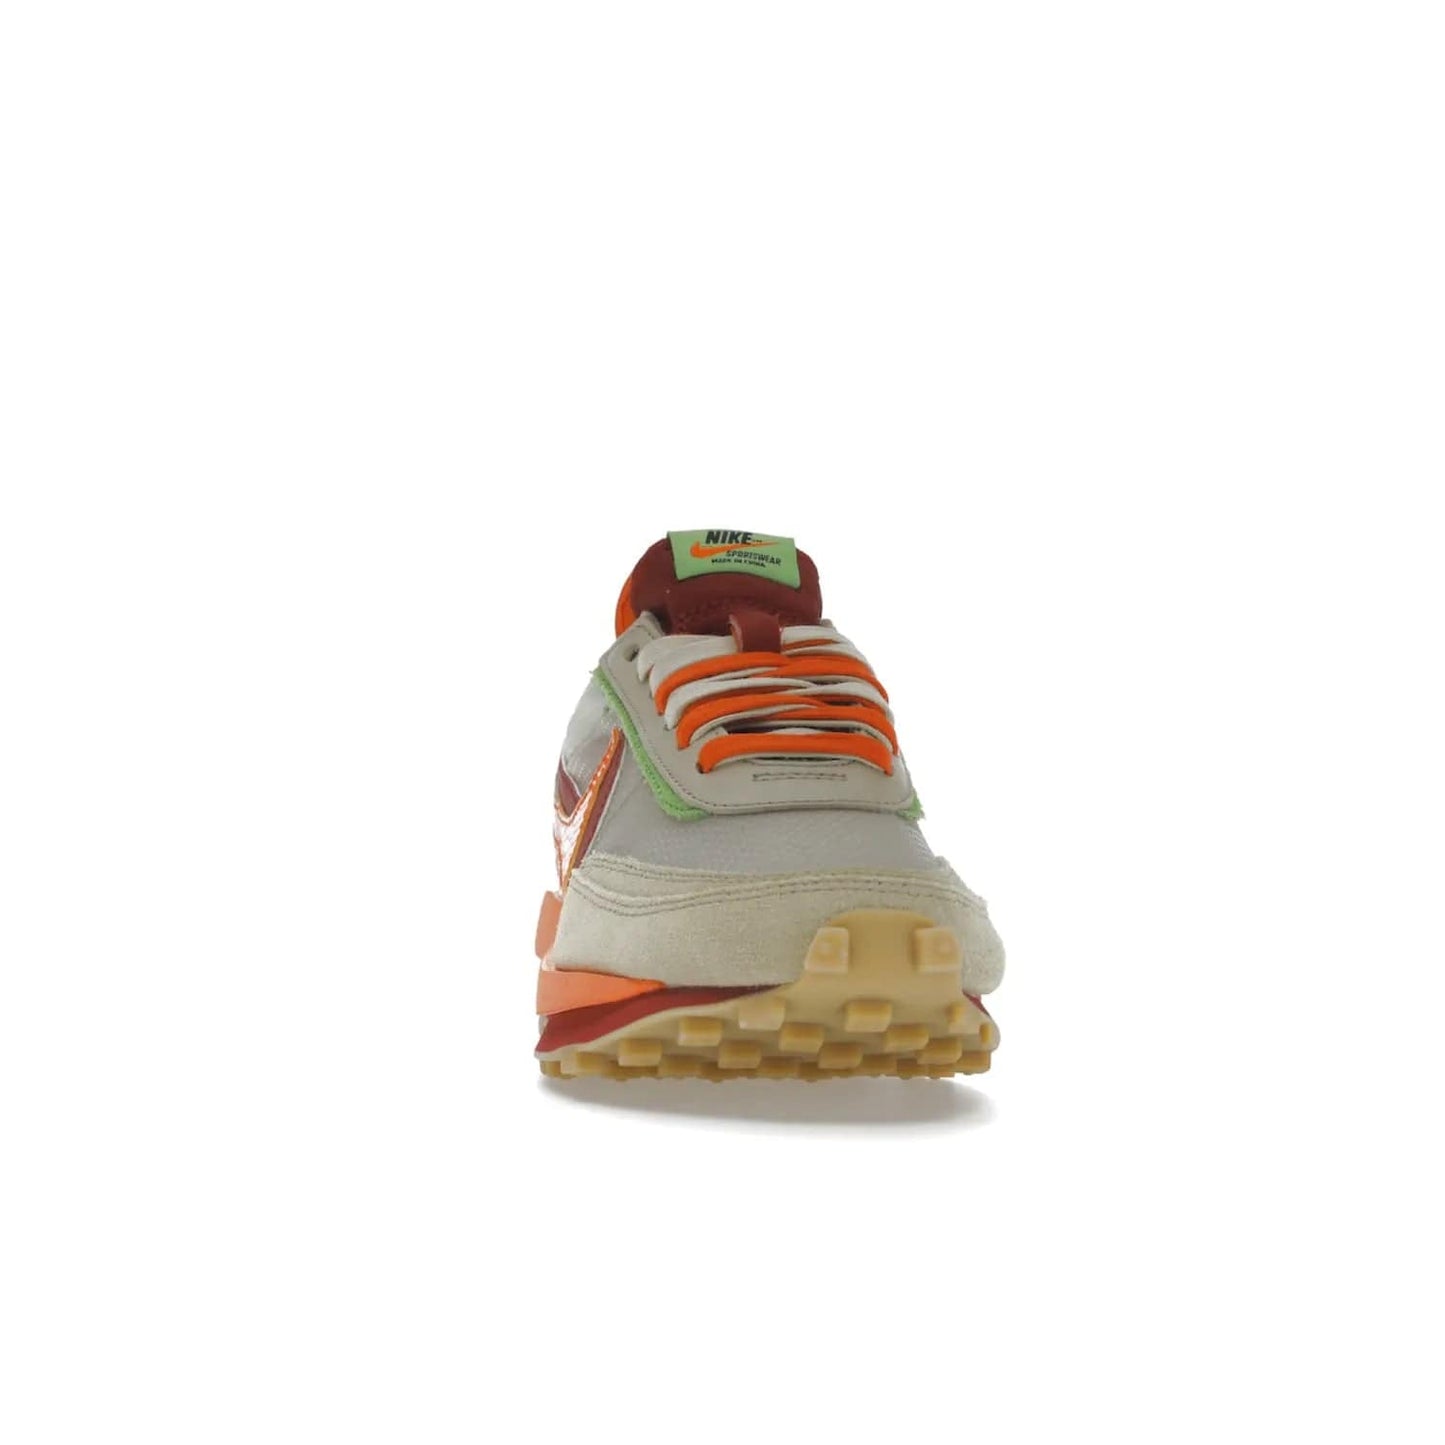 Nike LD Waffle sacai CLOT Kiss of Death Net Orange Blaze - Image 9 - Only at www.BallersClubKickz.com - A bold and stylish Nike LD Waffle sacai CLOT Kiss of Death Net Orange Blaze sneaker featuring a unique off-white, Deep Red & Orange Blaze Swooshes, two-toned stacked sole and doubled tongue. Available in September 2021. Make a statement.